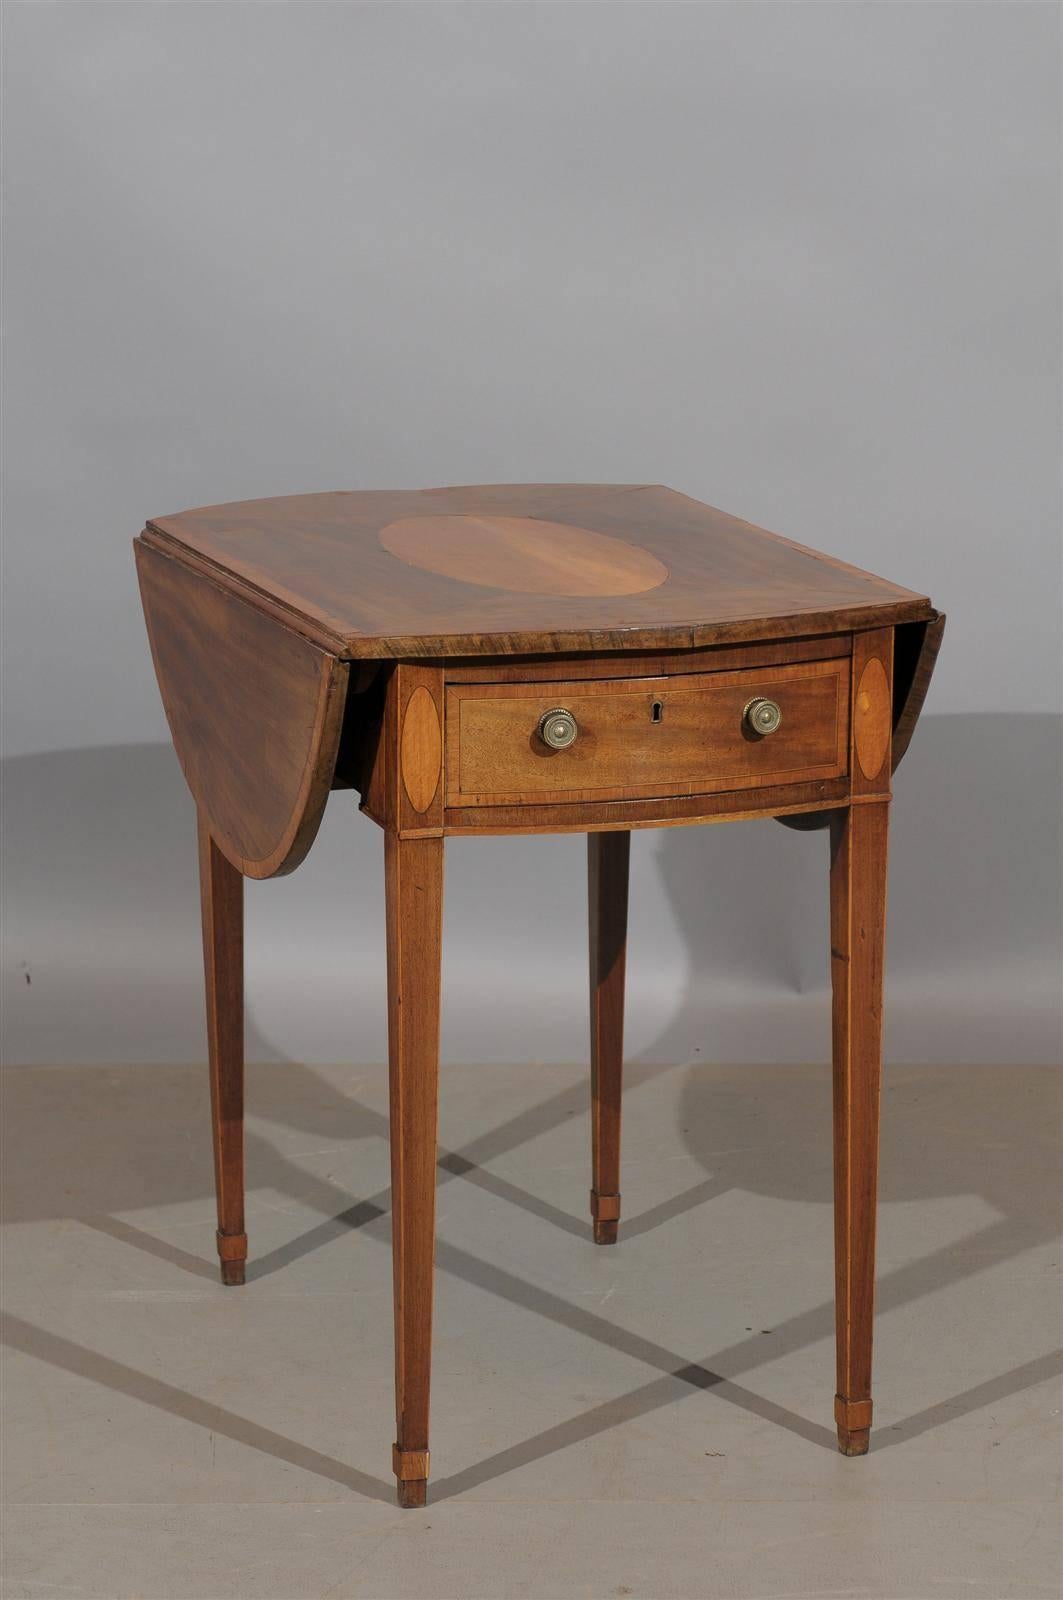 Late 18th century English George III mahogany pembroke table with inlay in satinwood.